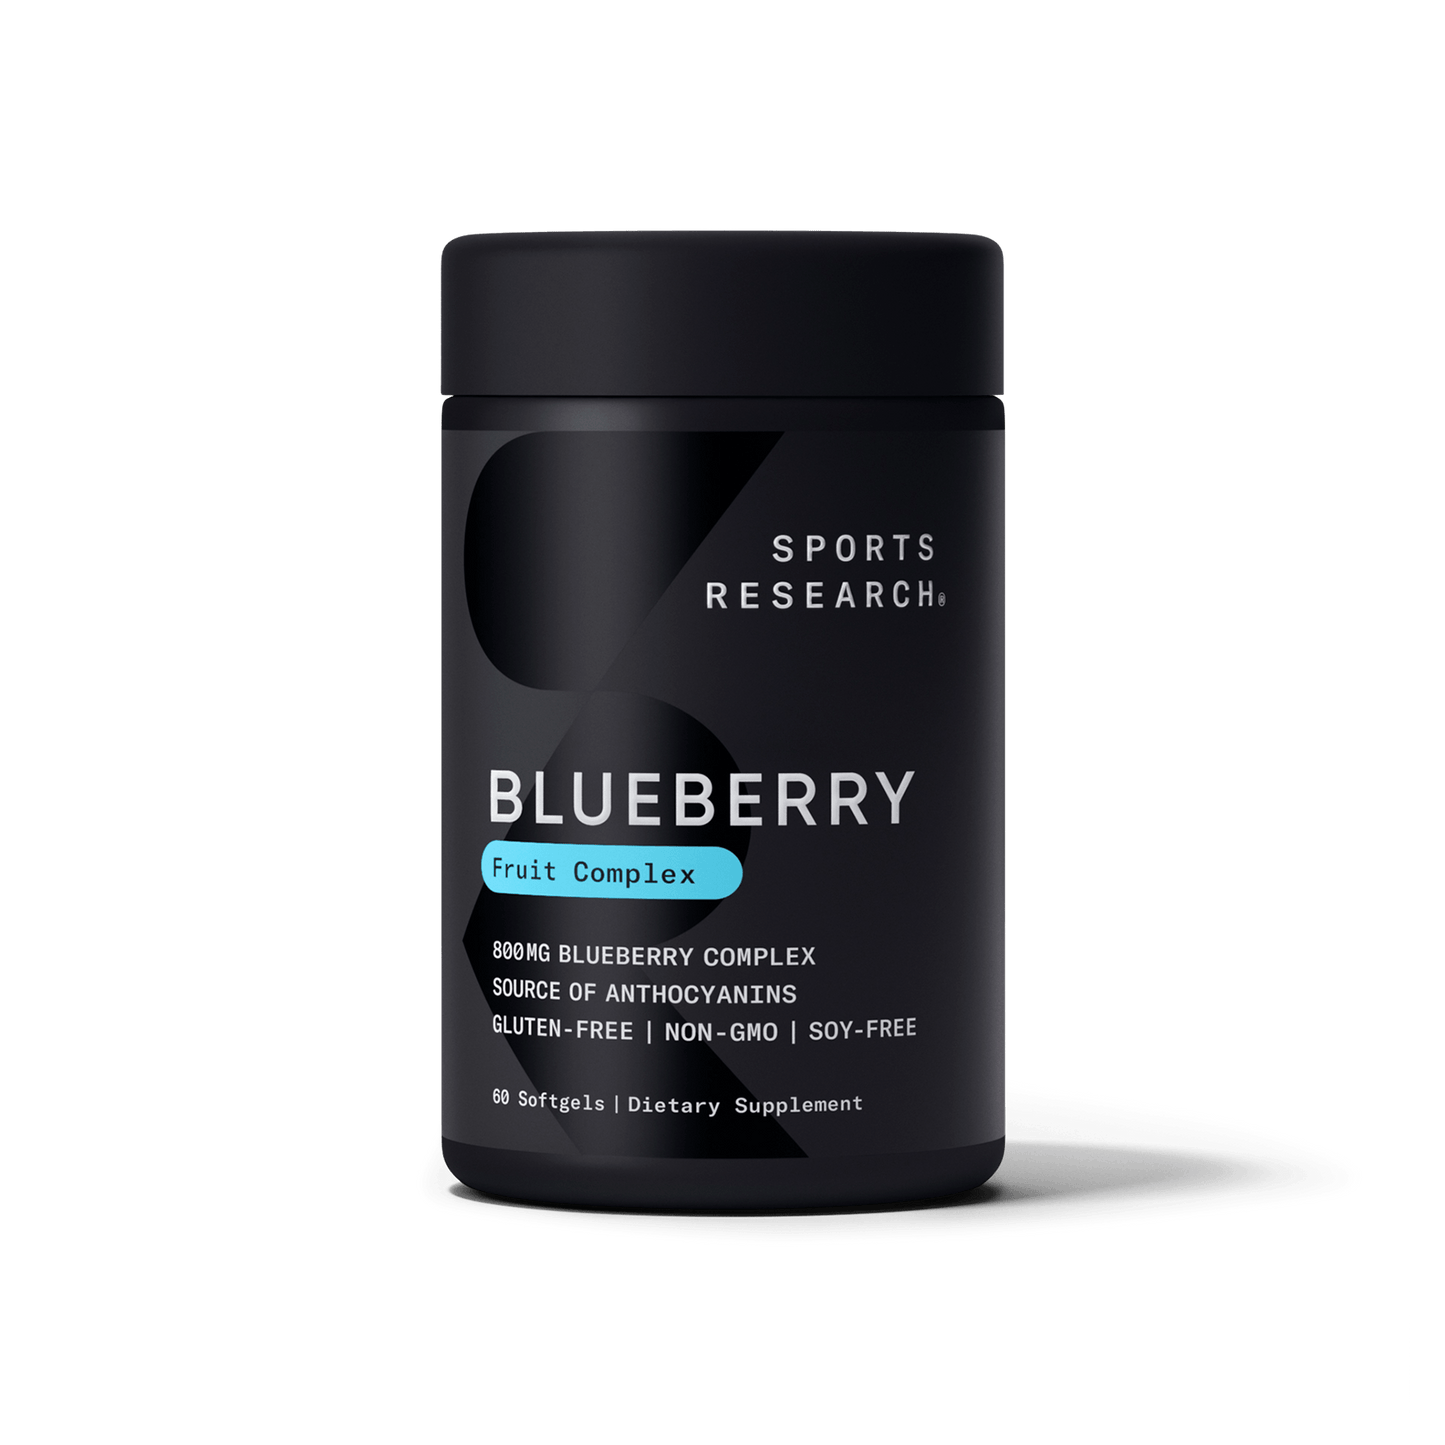 Sports Research Blueberry Fruit Complex.